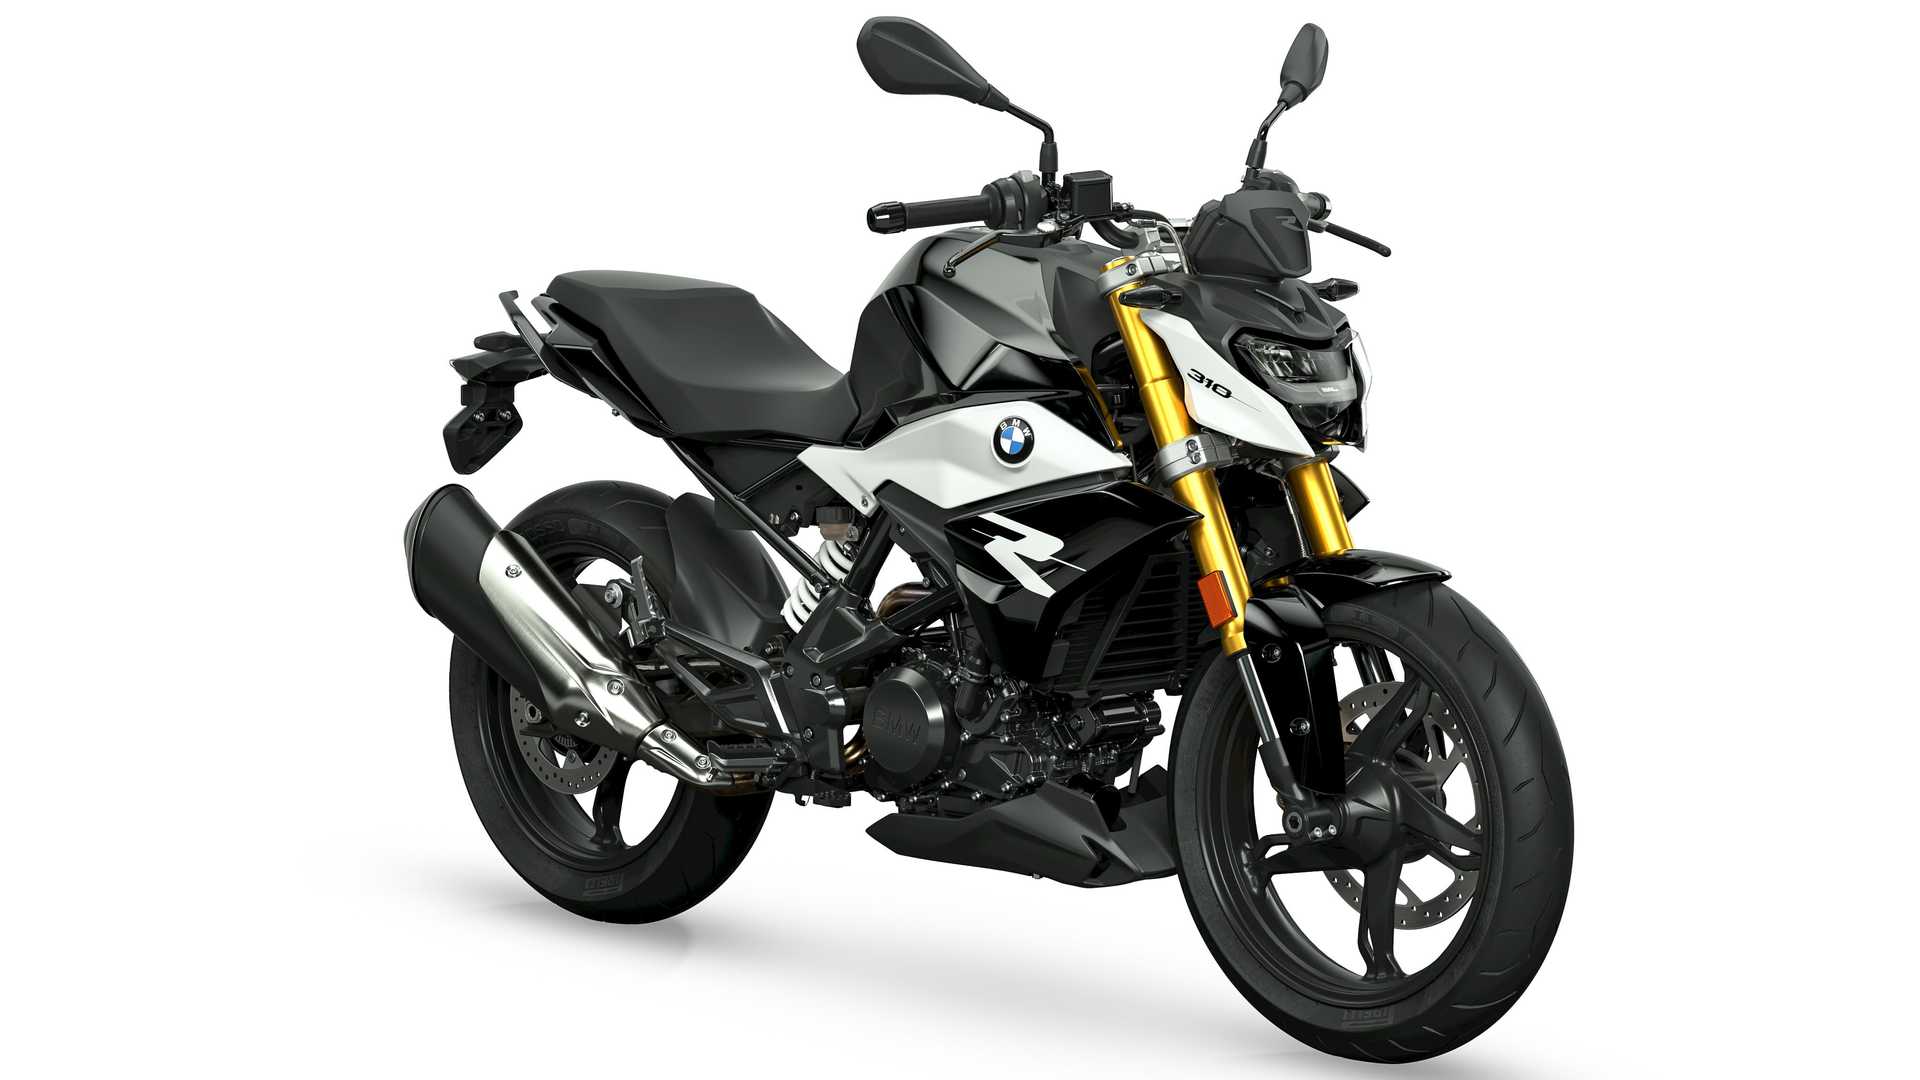 BMW G 310 R Officially Launches In Europe